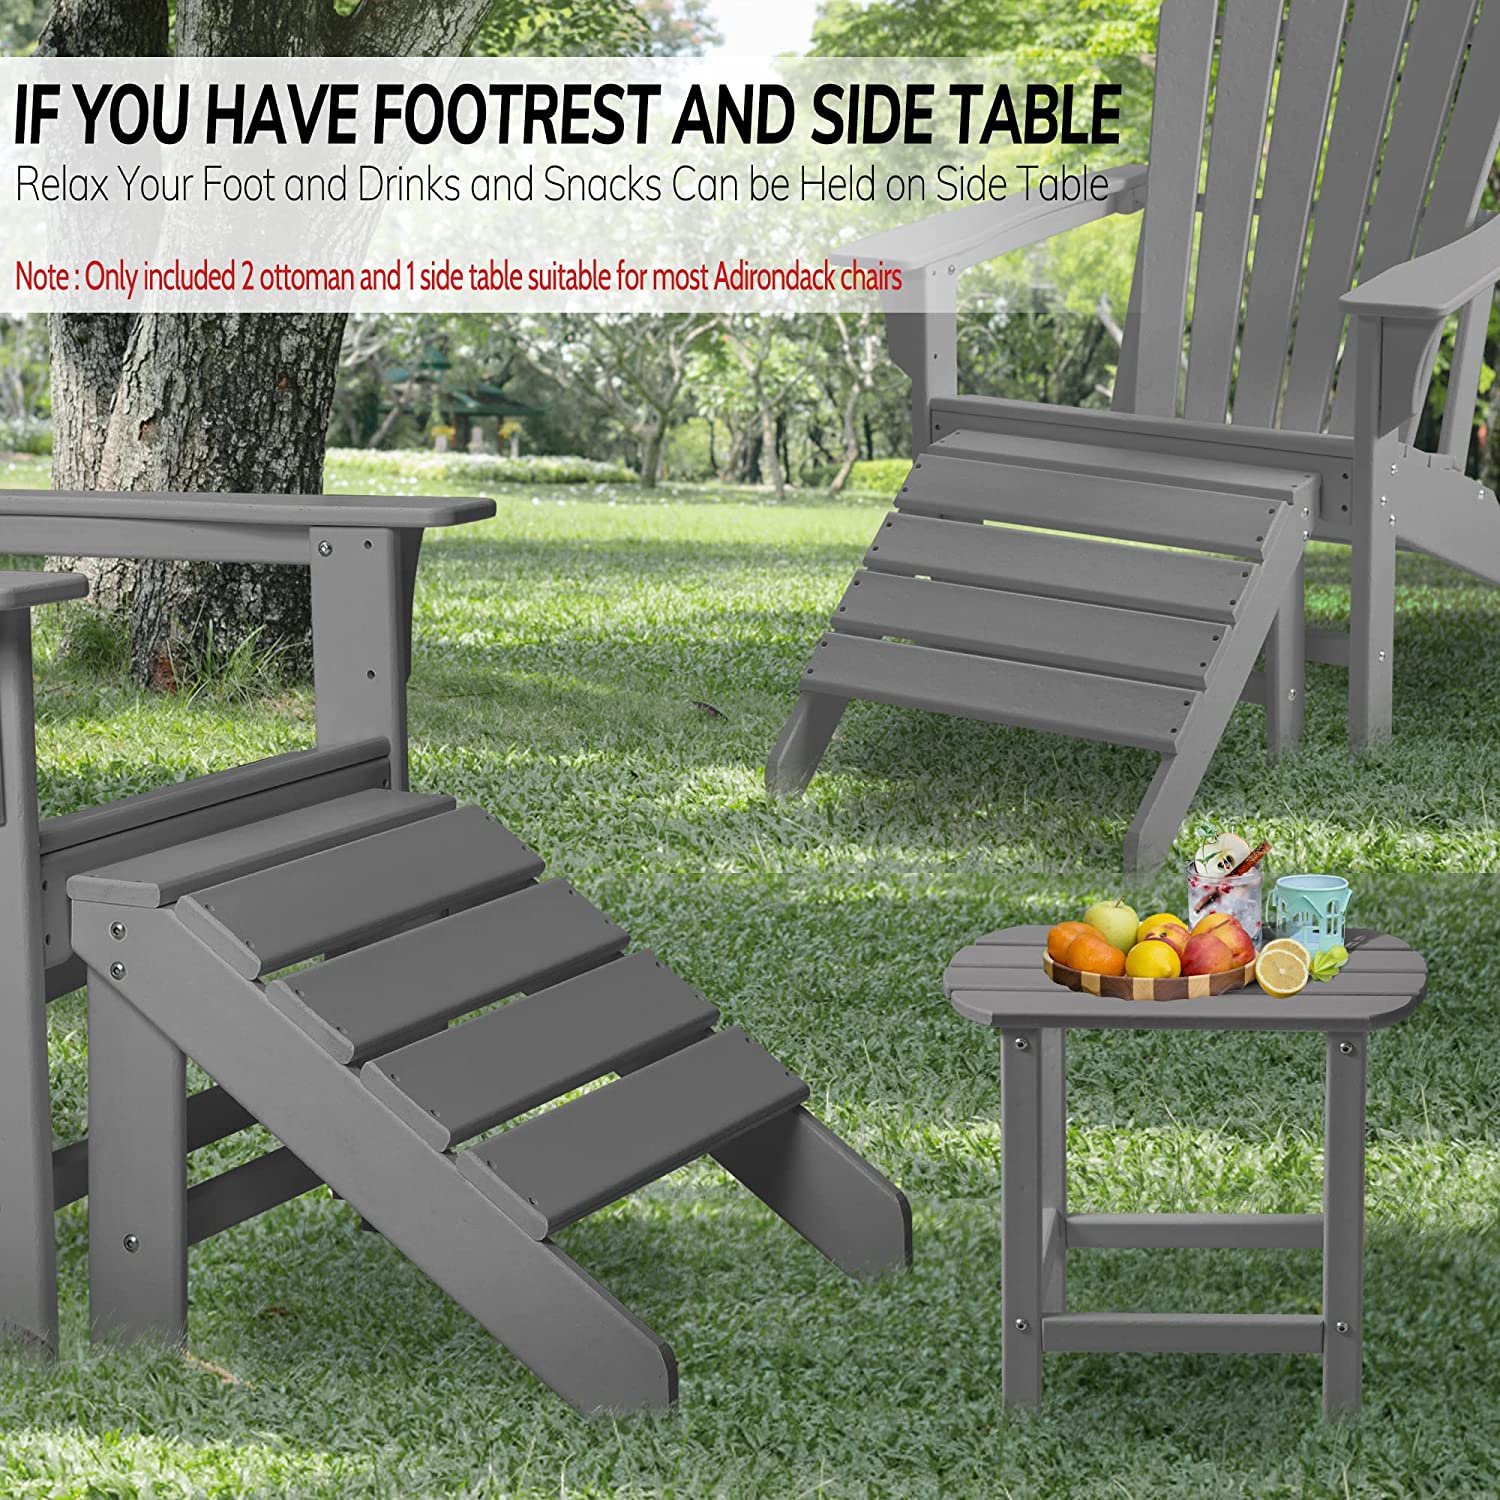 FHFO Adirondack Ottoman and Side Table for Adirondack Chairs, 2 Pieces Outdoor Adirondack Footrest & 1 Piece End Table, Weather Resistant Footstool Table for Adirondack Chair （Grey） - image 5 of 5